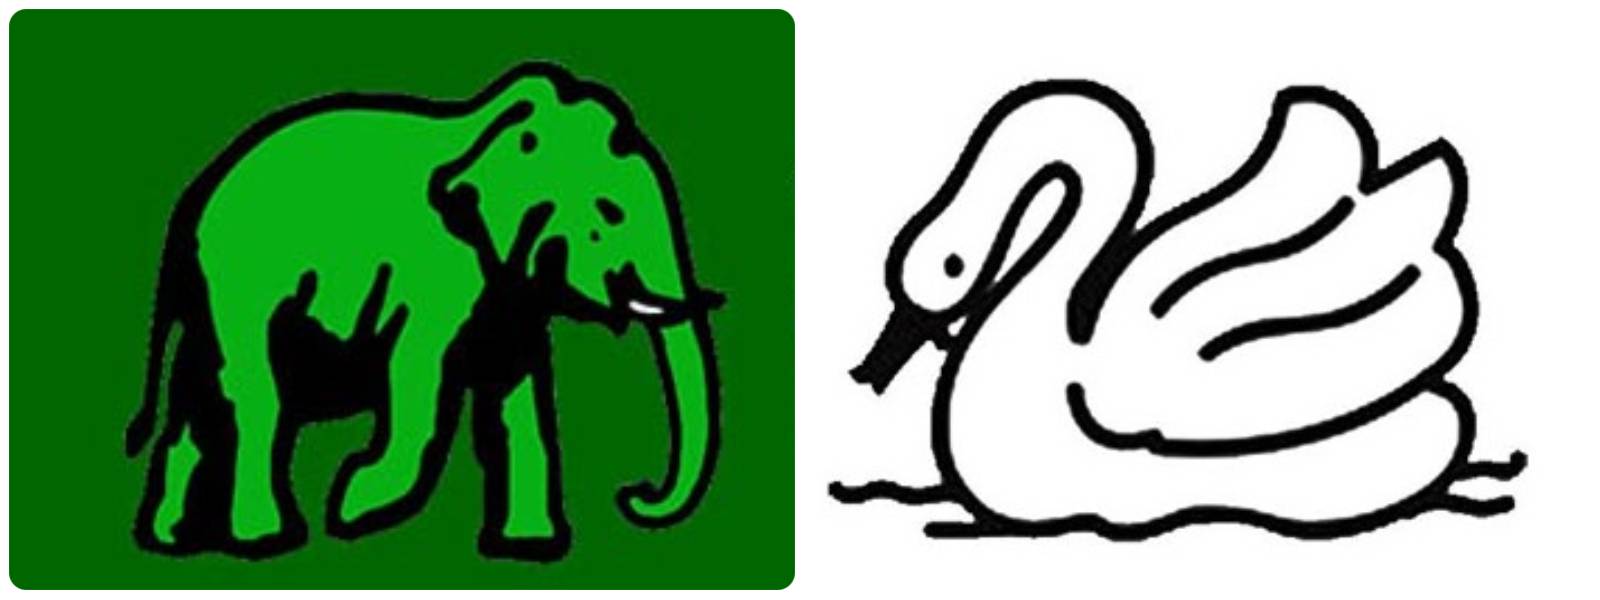 The Elephant or the Swan, what will the UNP working committee pick?